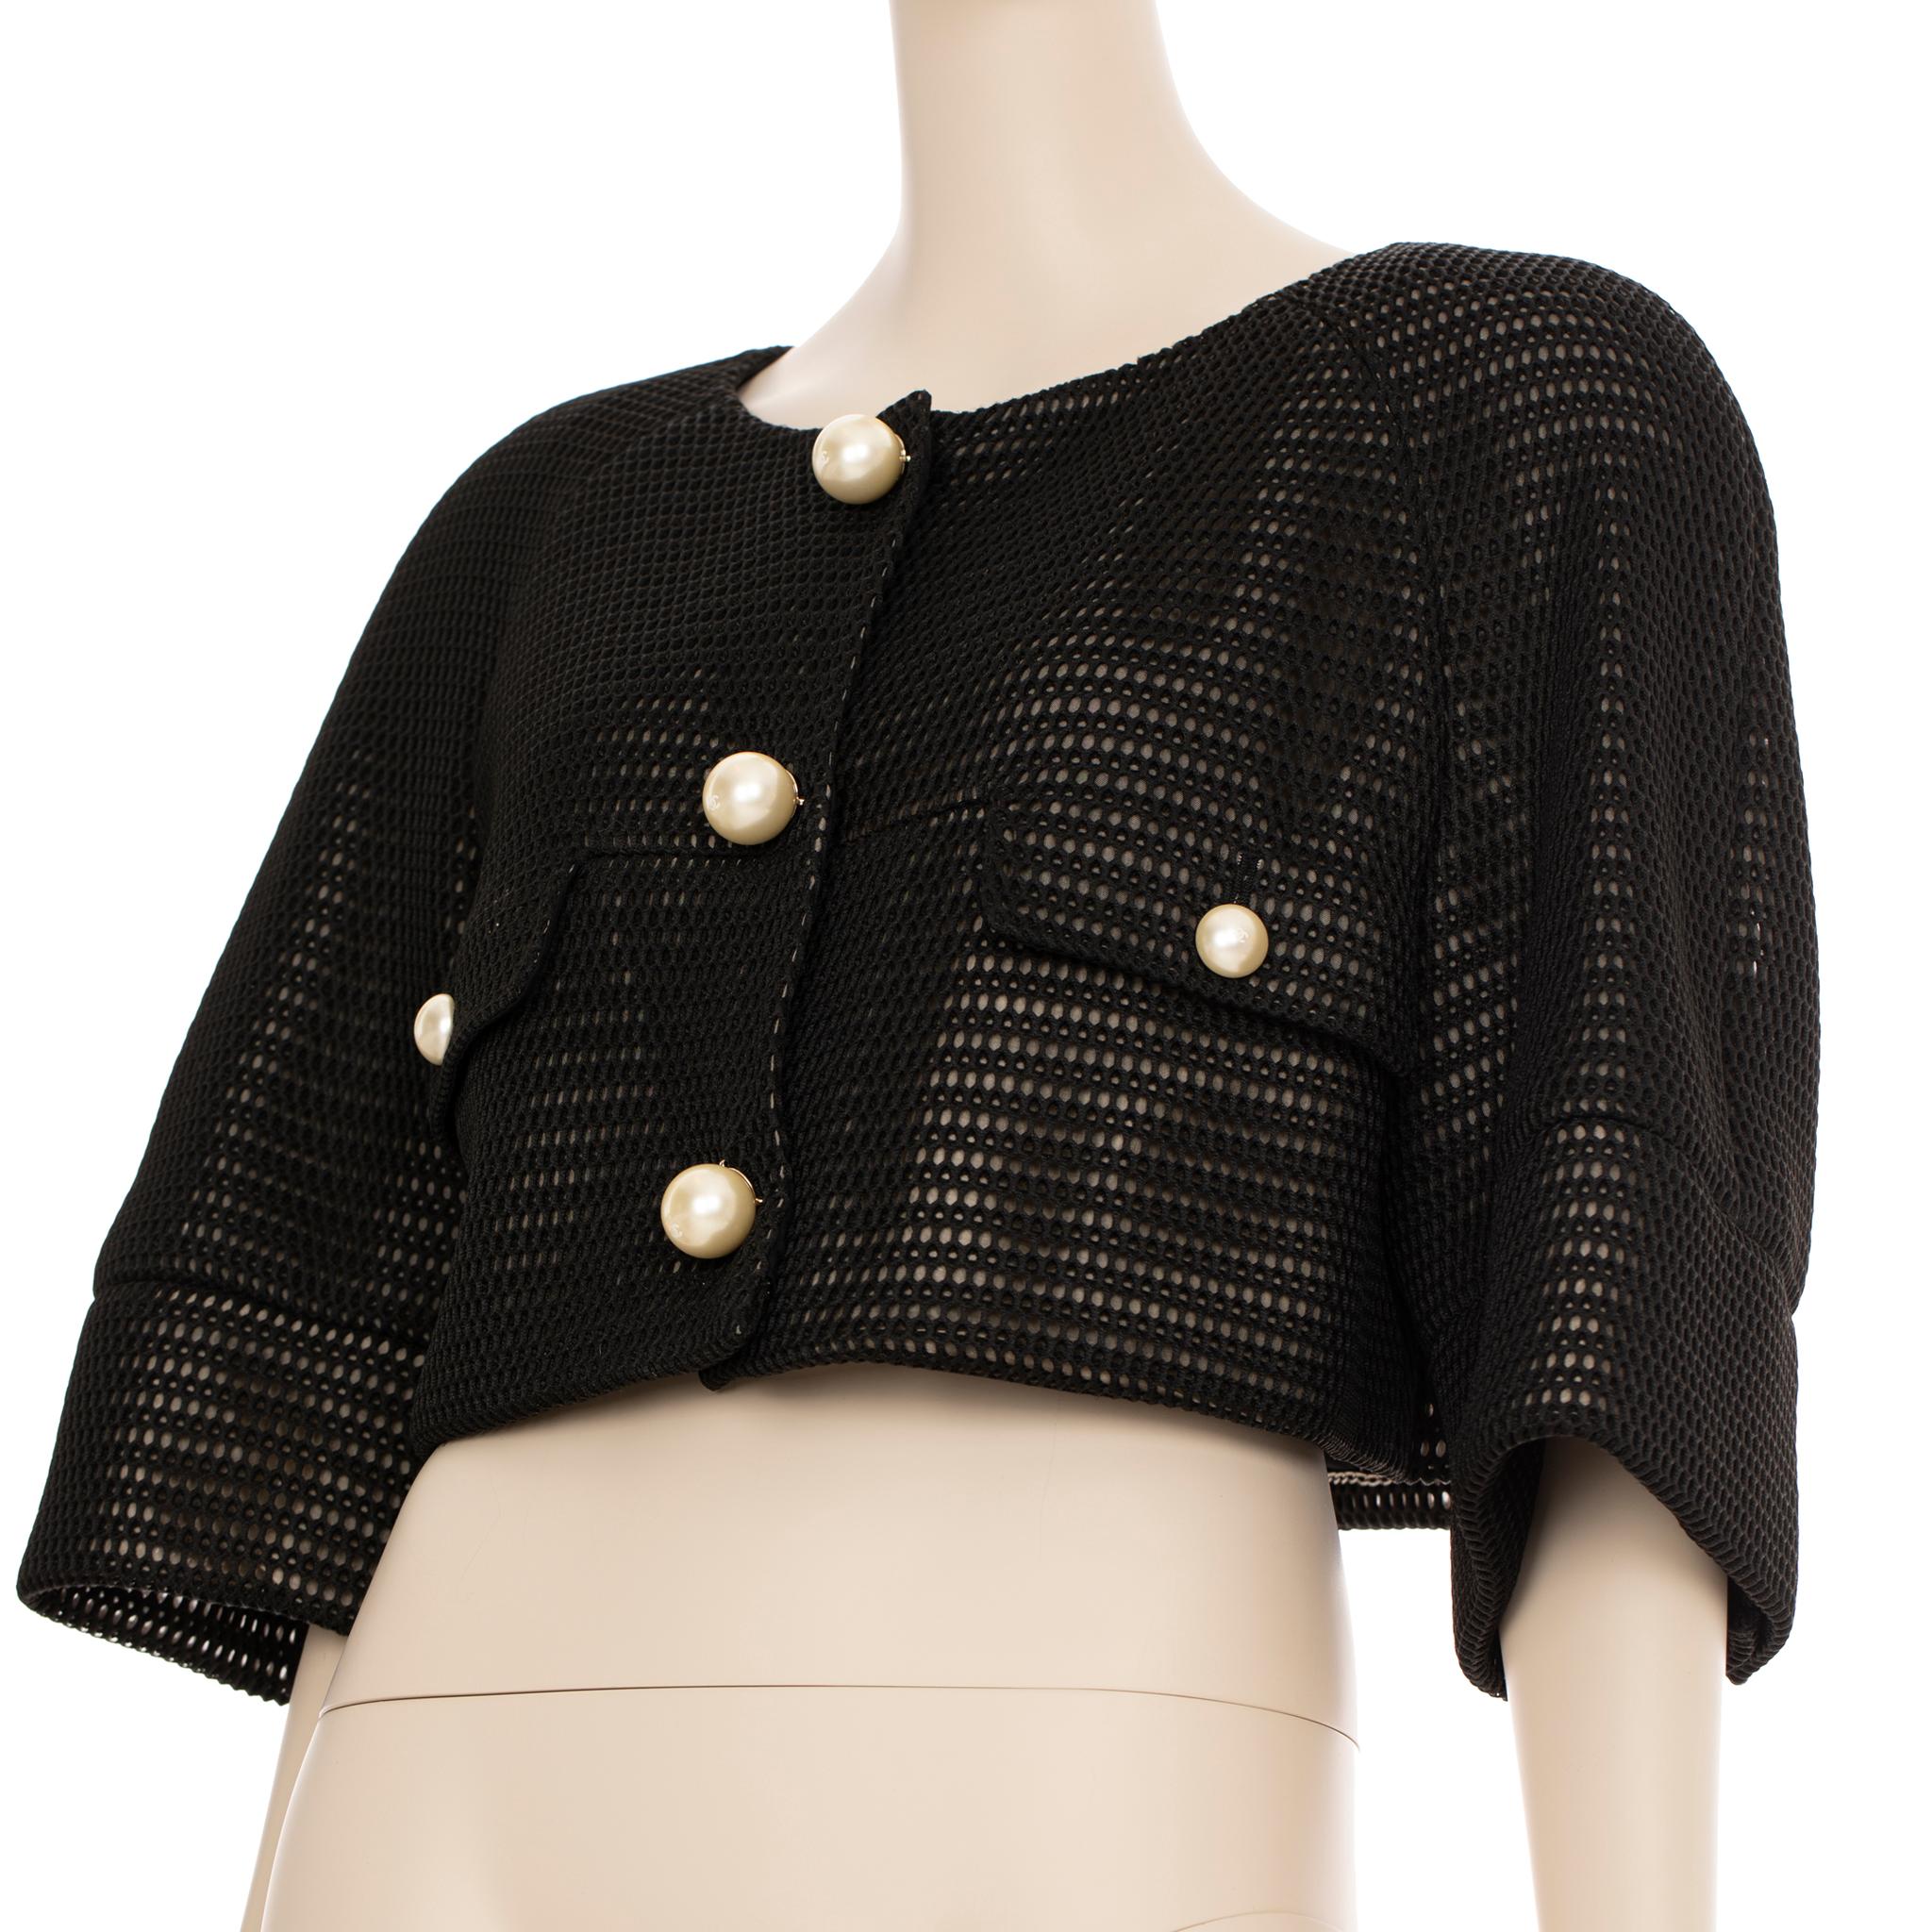 Chanel Crop Mesh Black Jacket With Faux Pearl Details 42 FR In Excellent Condition For Sale In DOUBLE BAY, NSW